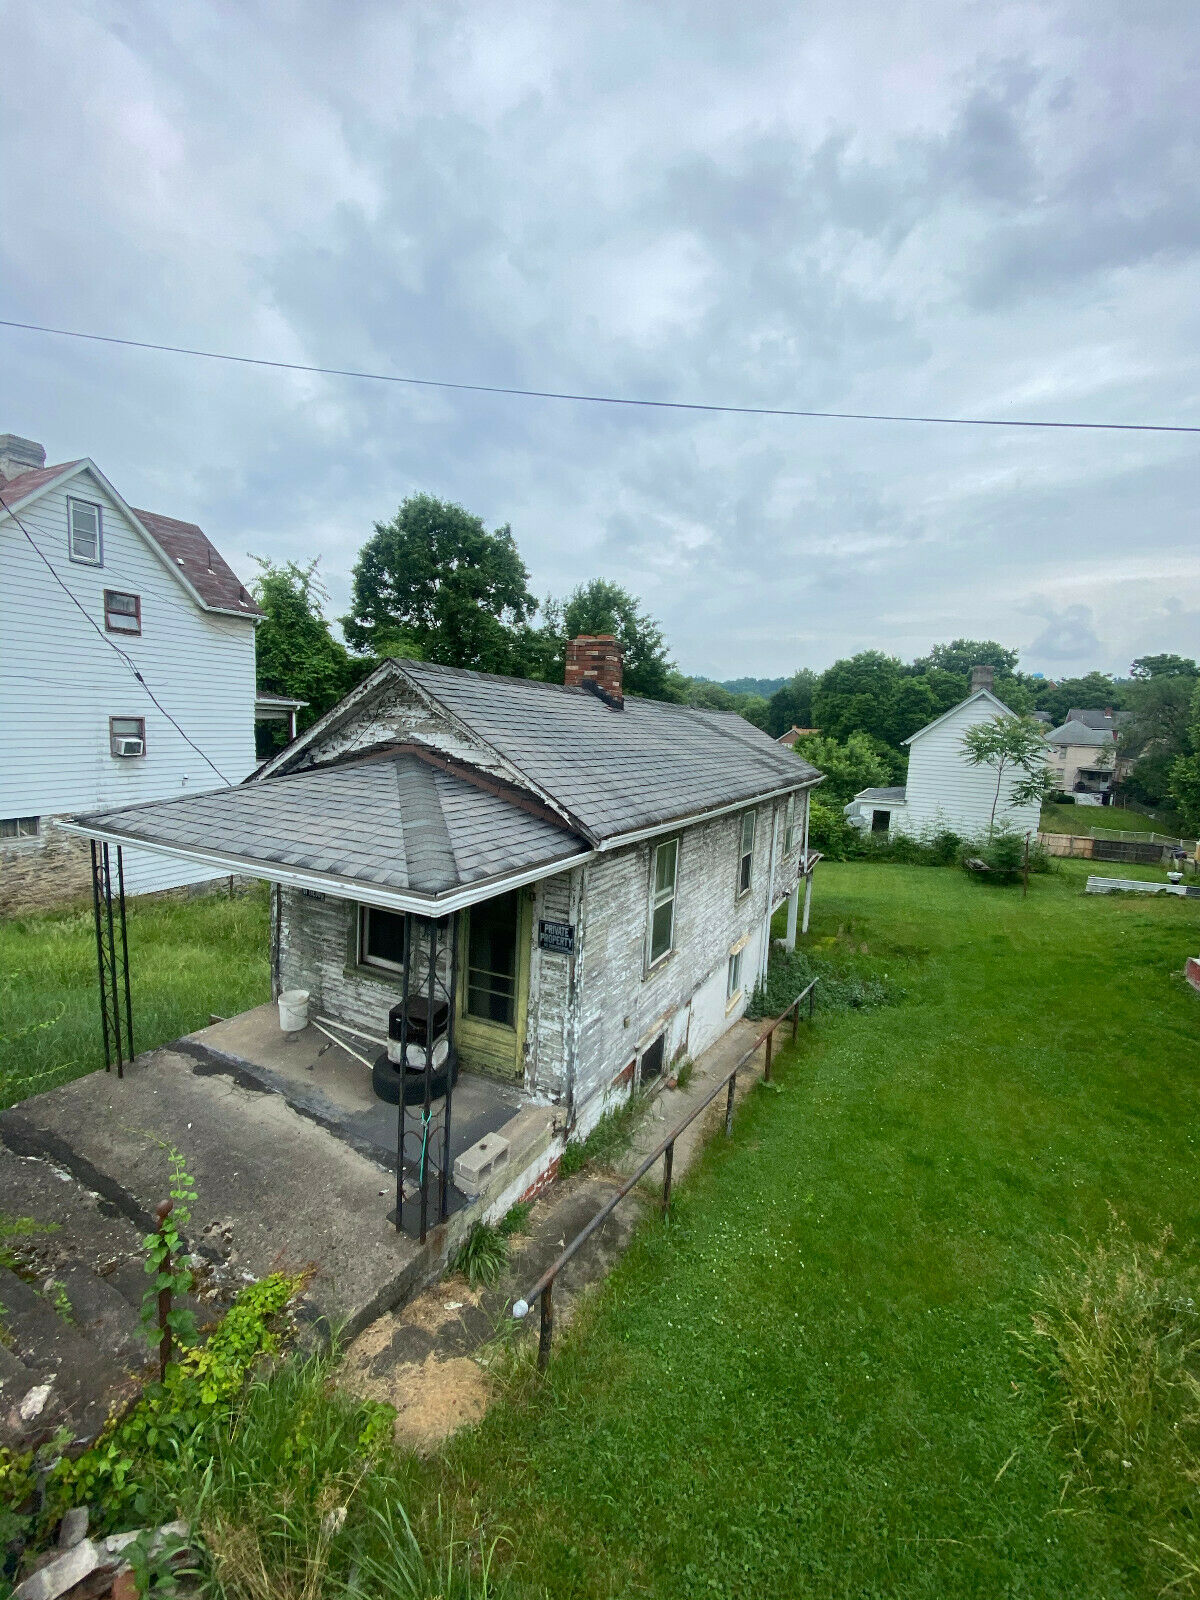 Foreclosure! 2 Bedroom 1 Bath On Quiet Street In Pa! Great Investment! No Rsrv